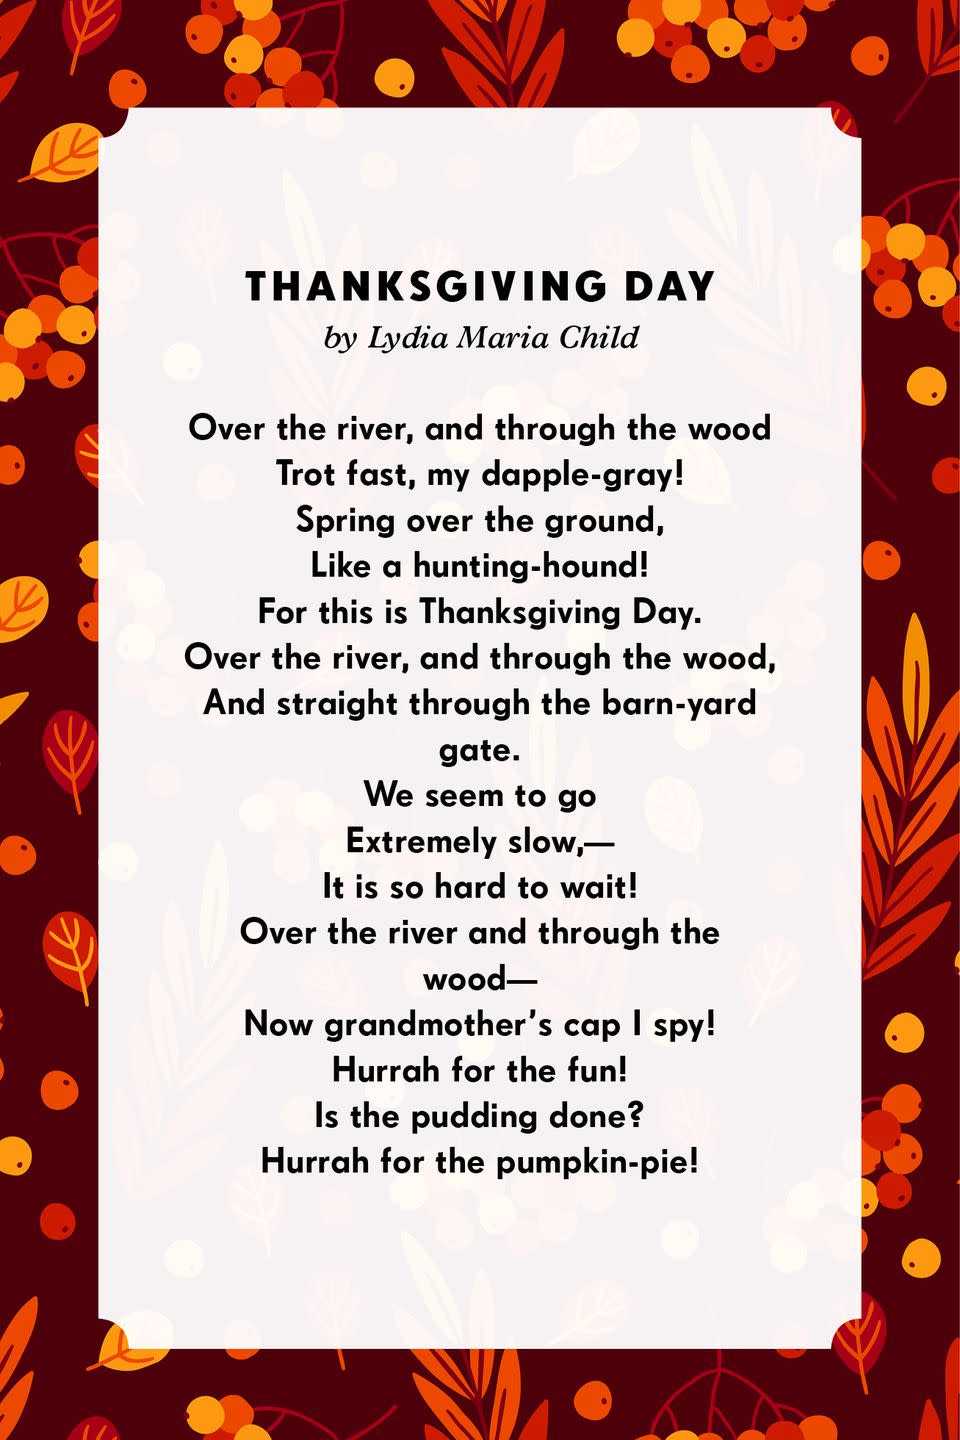 <p><strong>Thanksgiving Day</strong> </p><p>Over the river, and through the wood<br>Trot fast, my dapple-gray!<br>Spring over the ground,<br>Like a hunting-hound!<br>For this is Thanksgiving Day.<br>Over the river, and through the wood,<br>And straight through the barn-yard gate.<br>We seem to go<br>Extremely slow,—<br>It is so hard to wait!<br>Over the river and through the wood—<br>Now grandmother's cap I spy!<br>Hurrah for the fun!<br>Is the pudding done?<br>Hurrah for the pumpkin-pie<br></p>